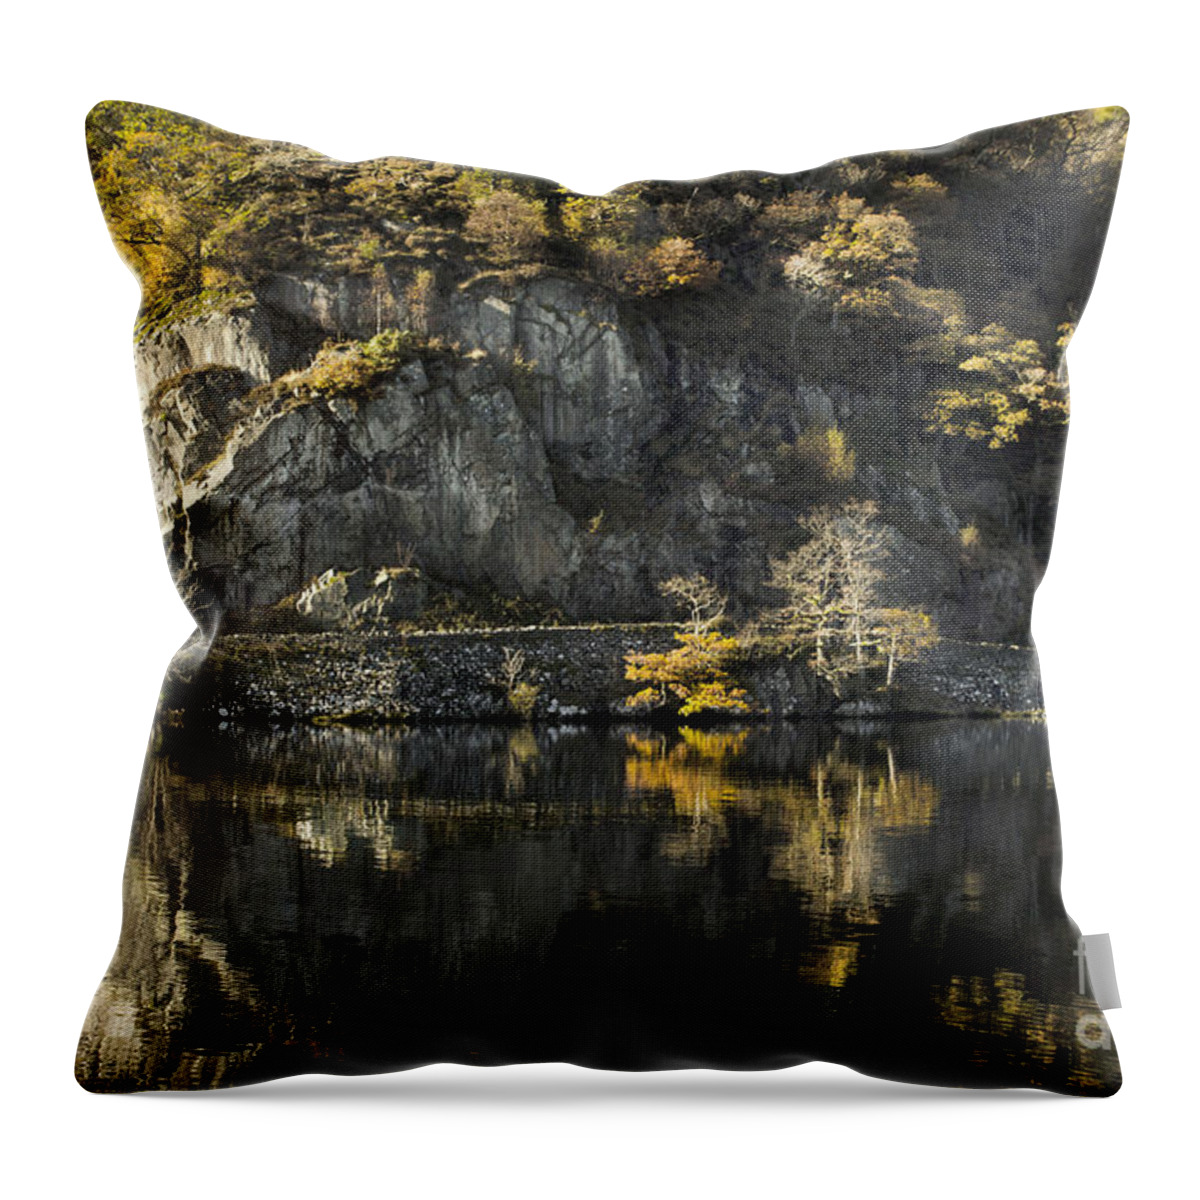 Autumn Throw Pillow featuring the photograph Autumn In The Lake by Linsey Williams